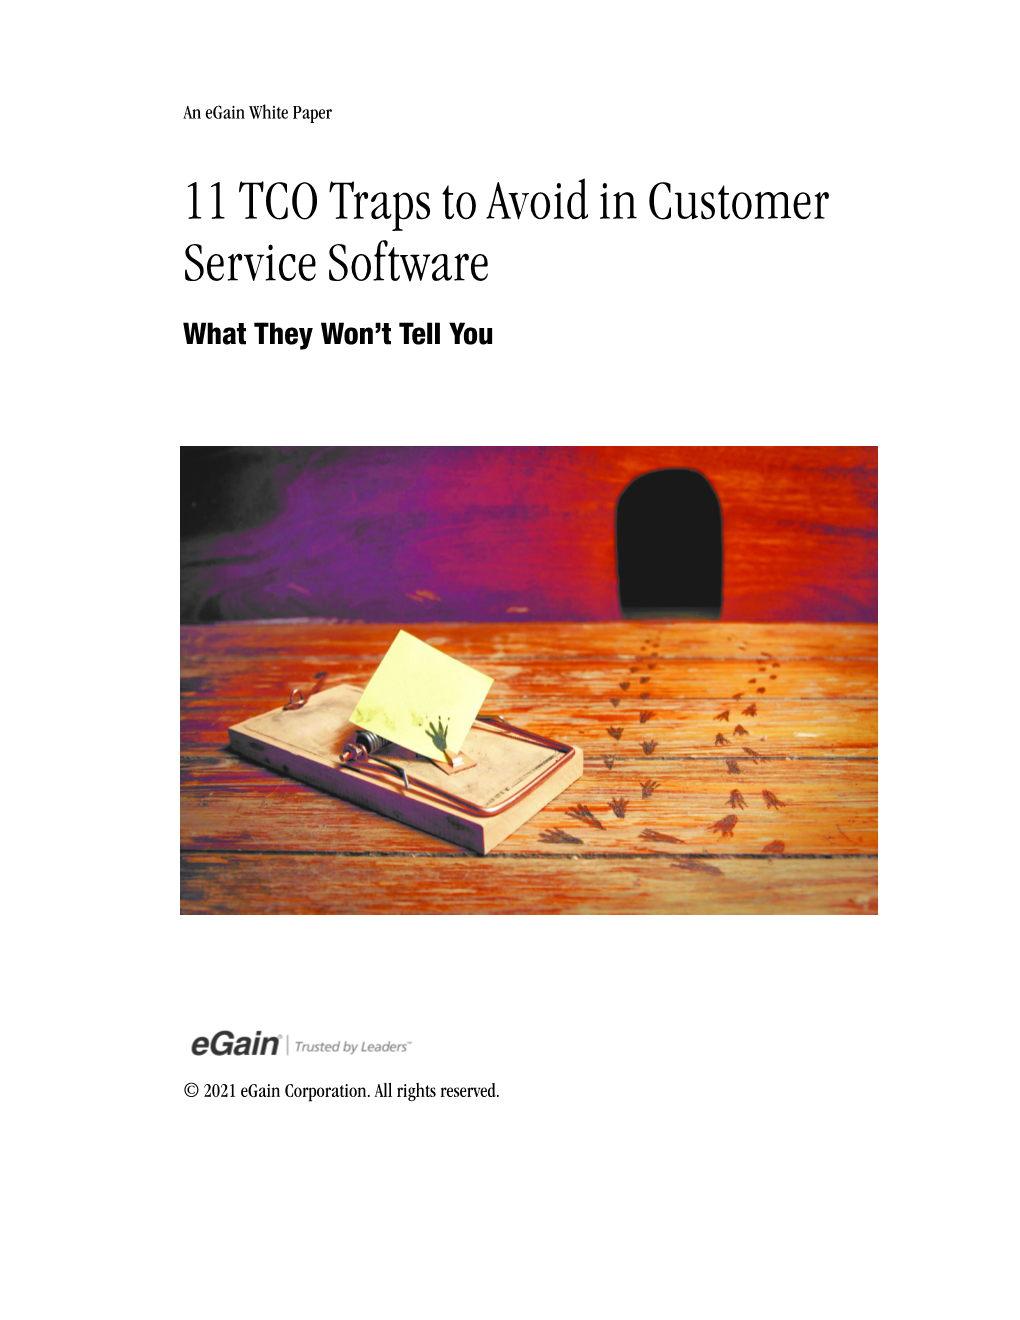 11 TCO Traps to Avoid in Customer Service Software